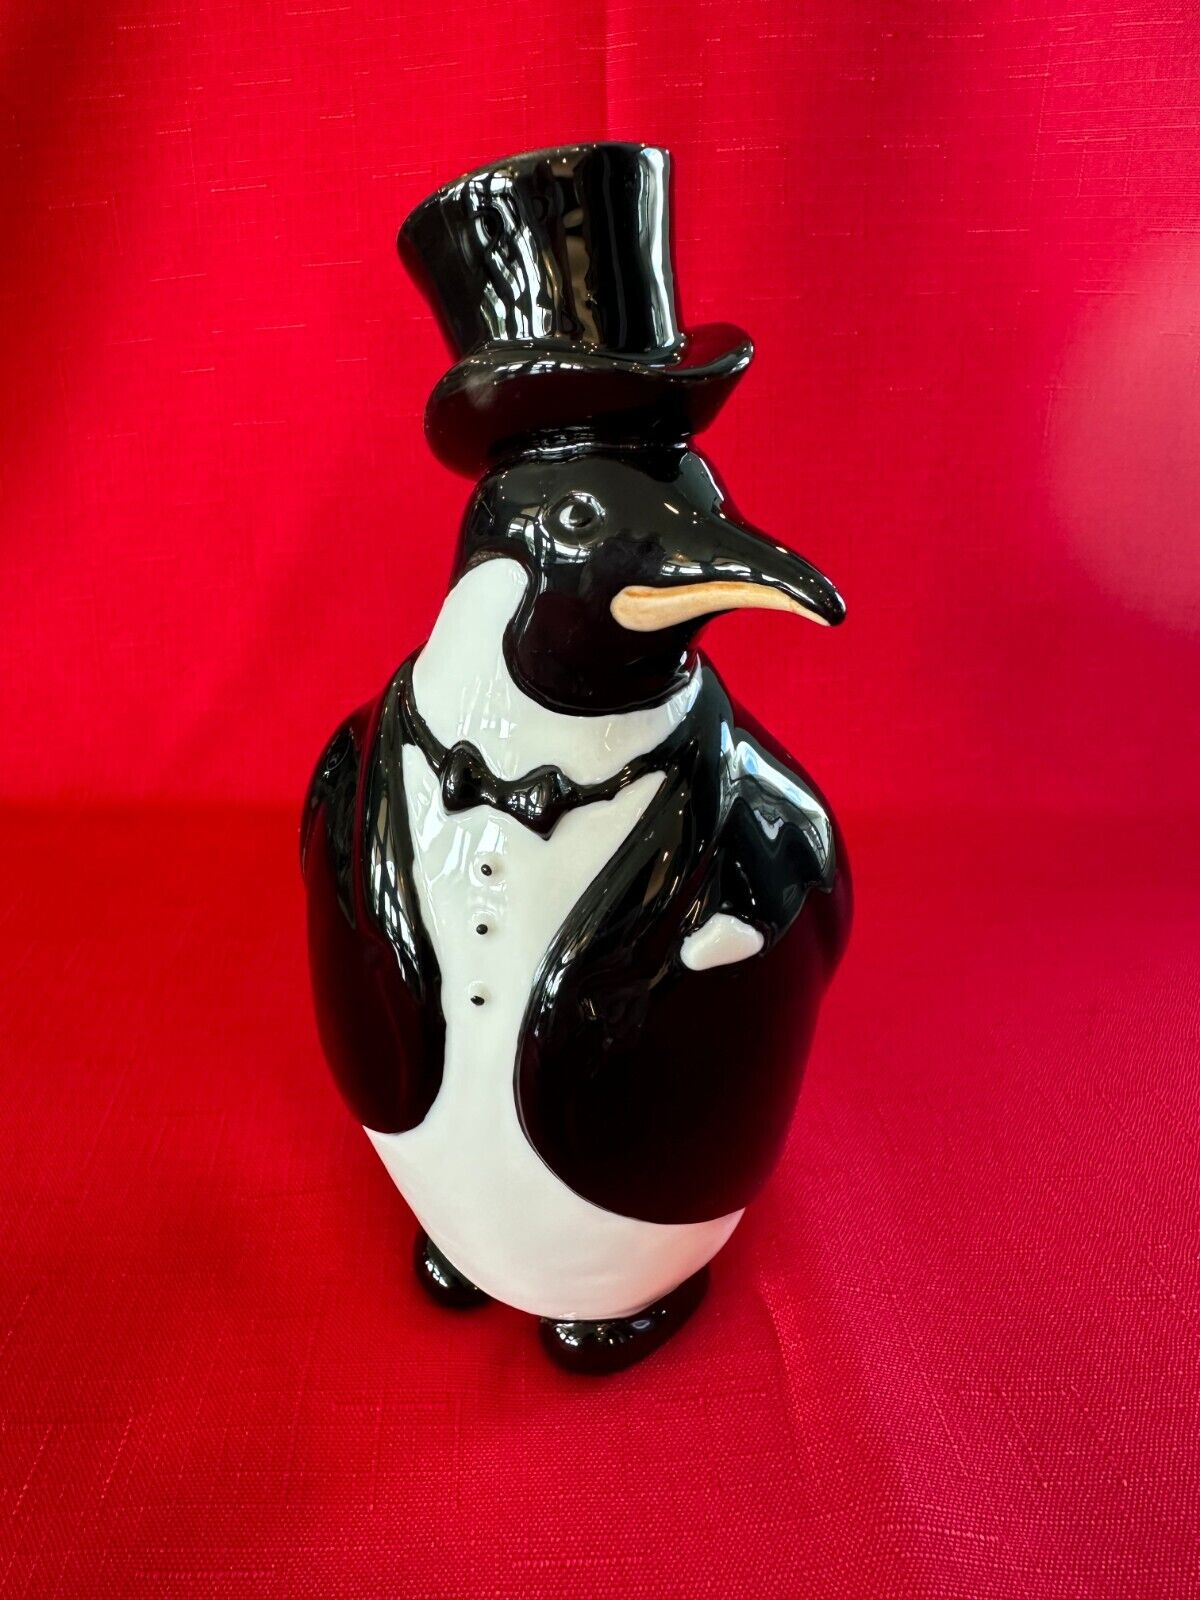 Vintage Enesco penguin figurine (1985) with Top Hat and Tuxedo - Great Condition